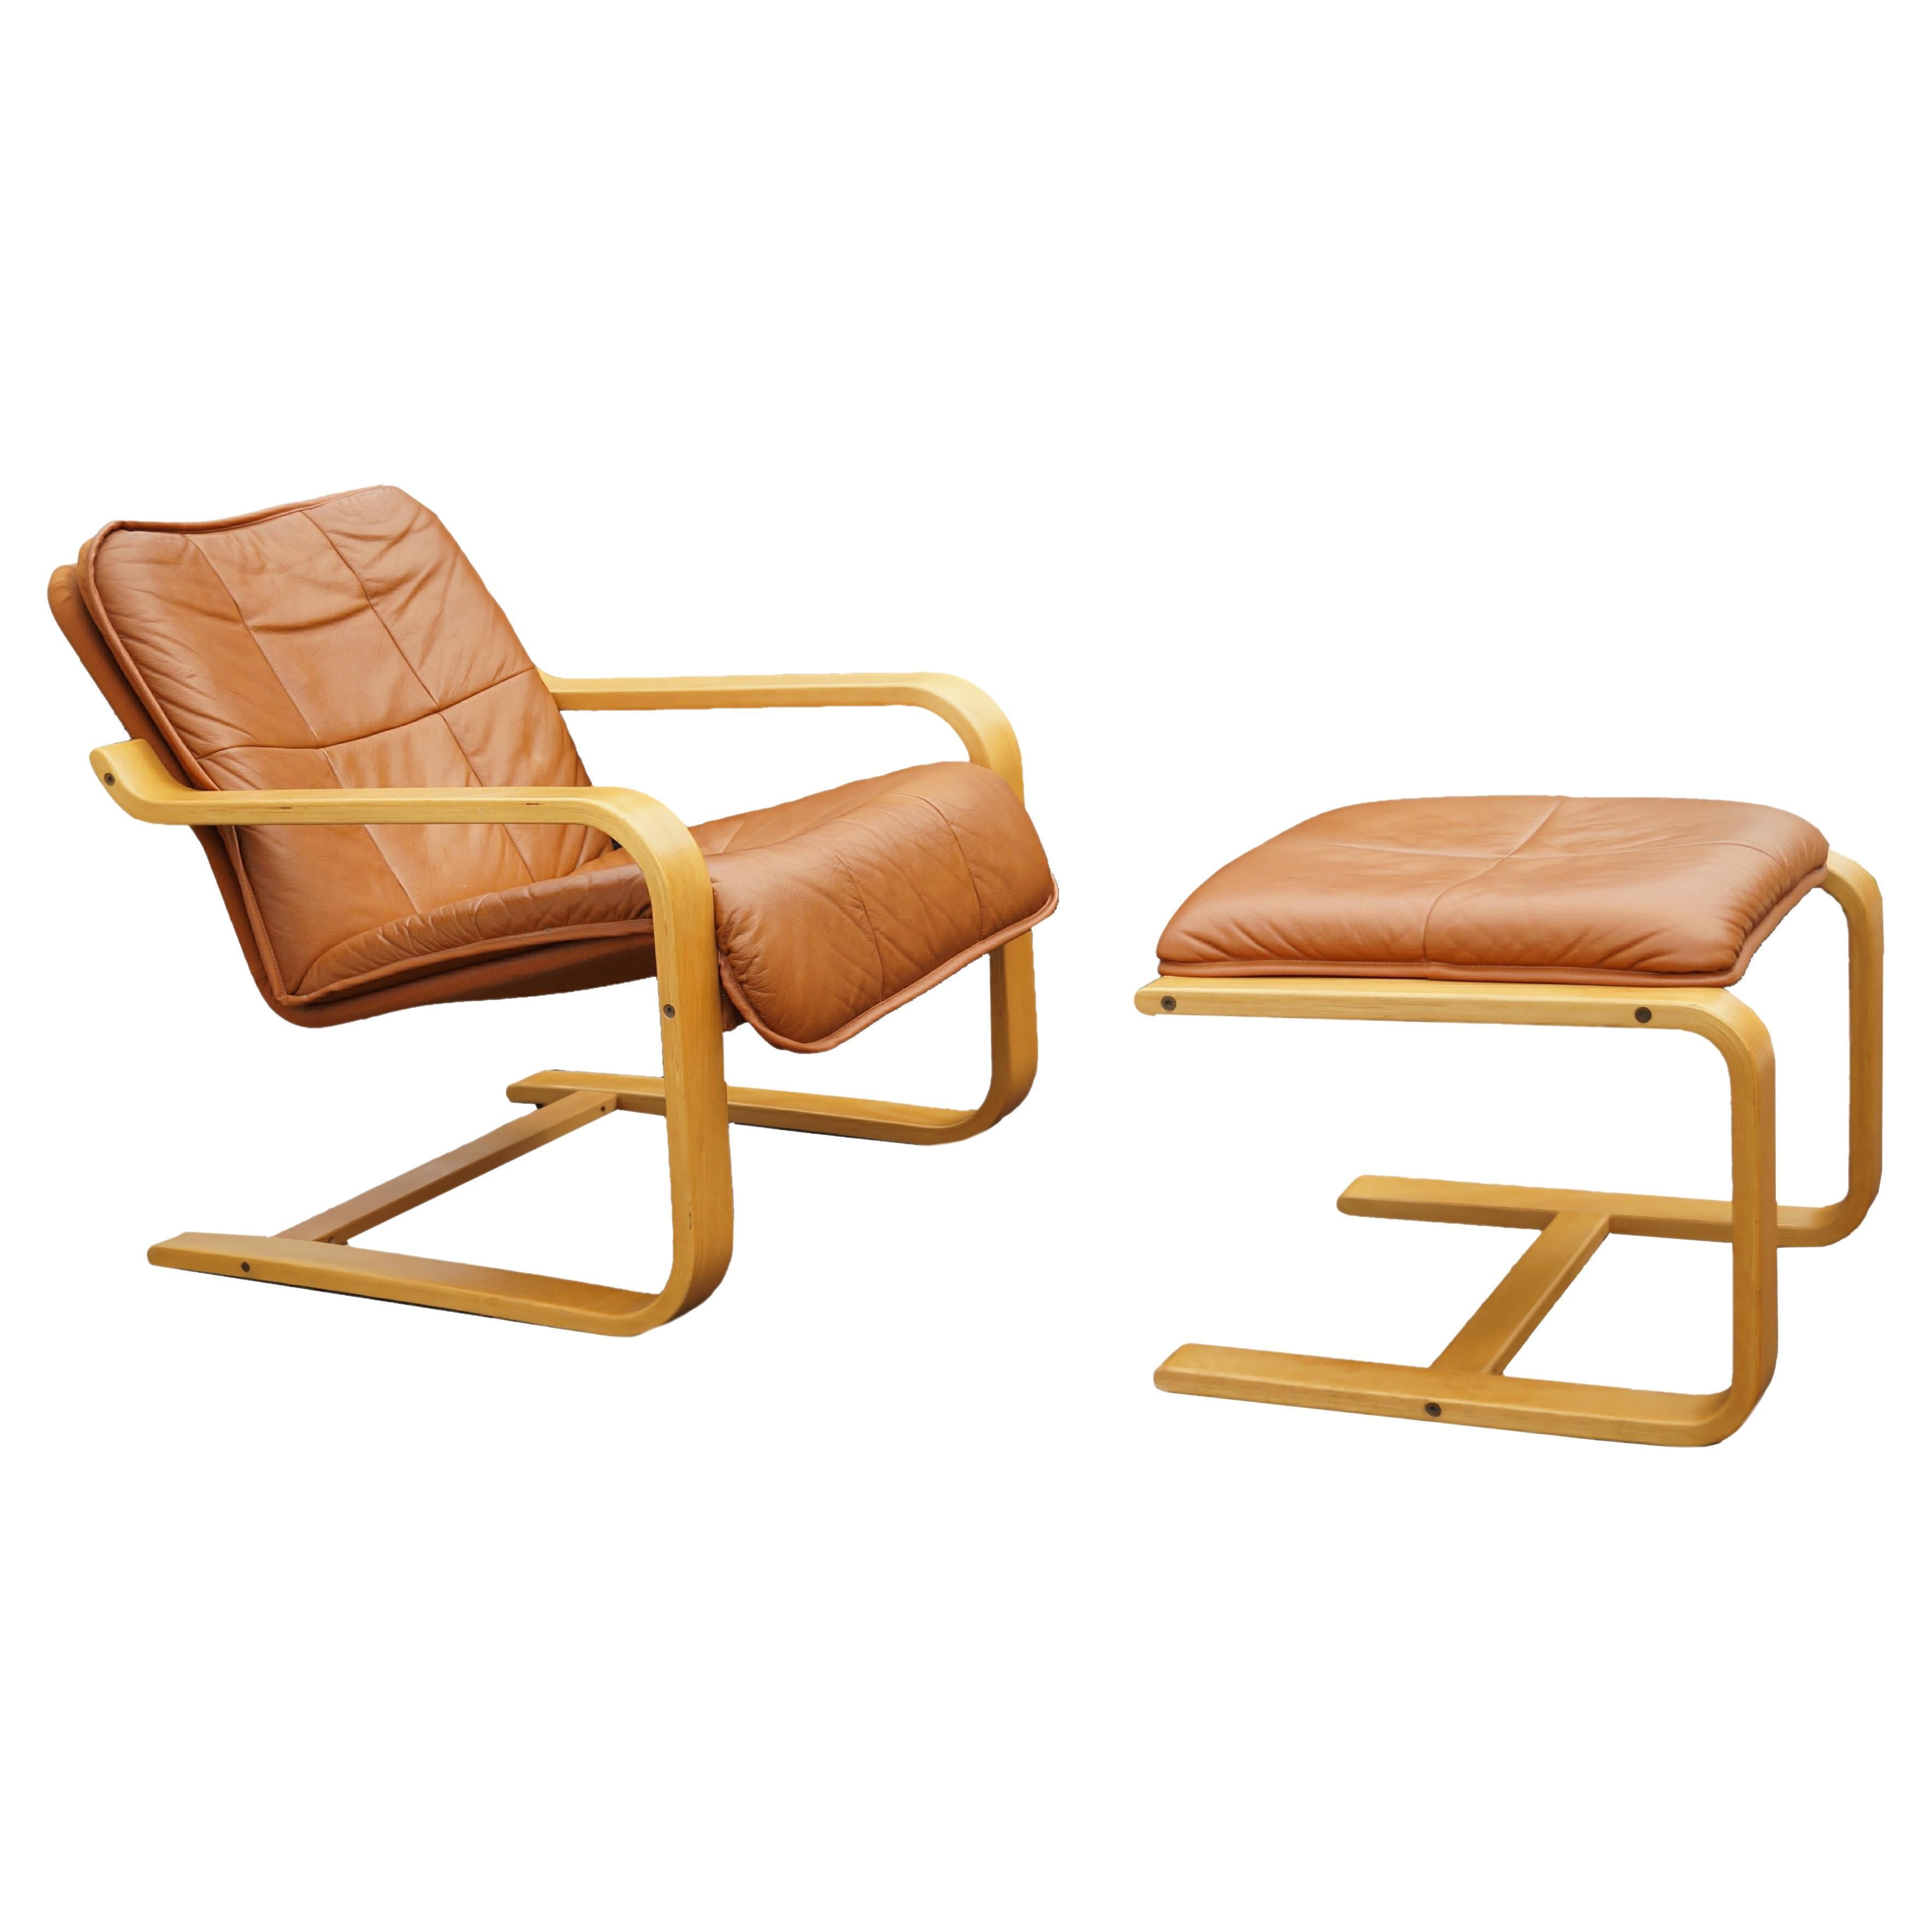 Leather Lounge Chair & Ottoman Set Mid-Century Modern OY BJ Dahlqvist AB Finland For Sale